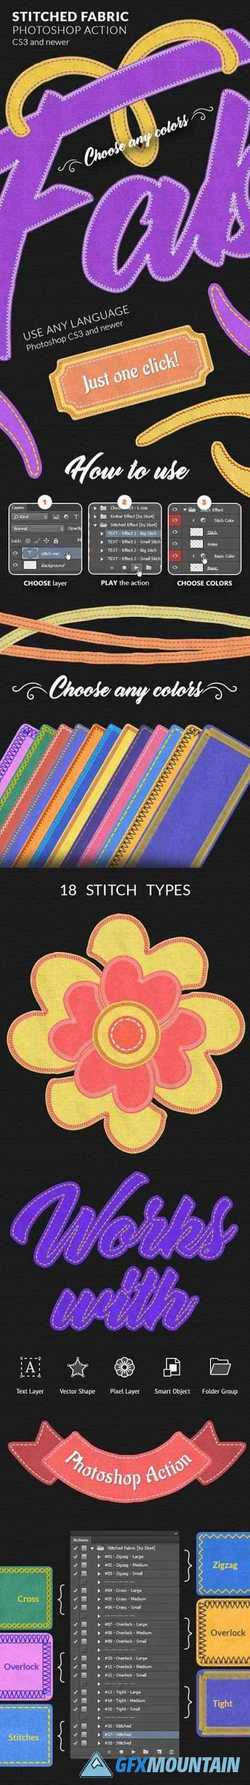 STITCHED FABRIC ACTION - 24305818